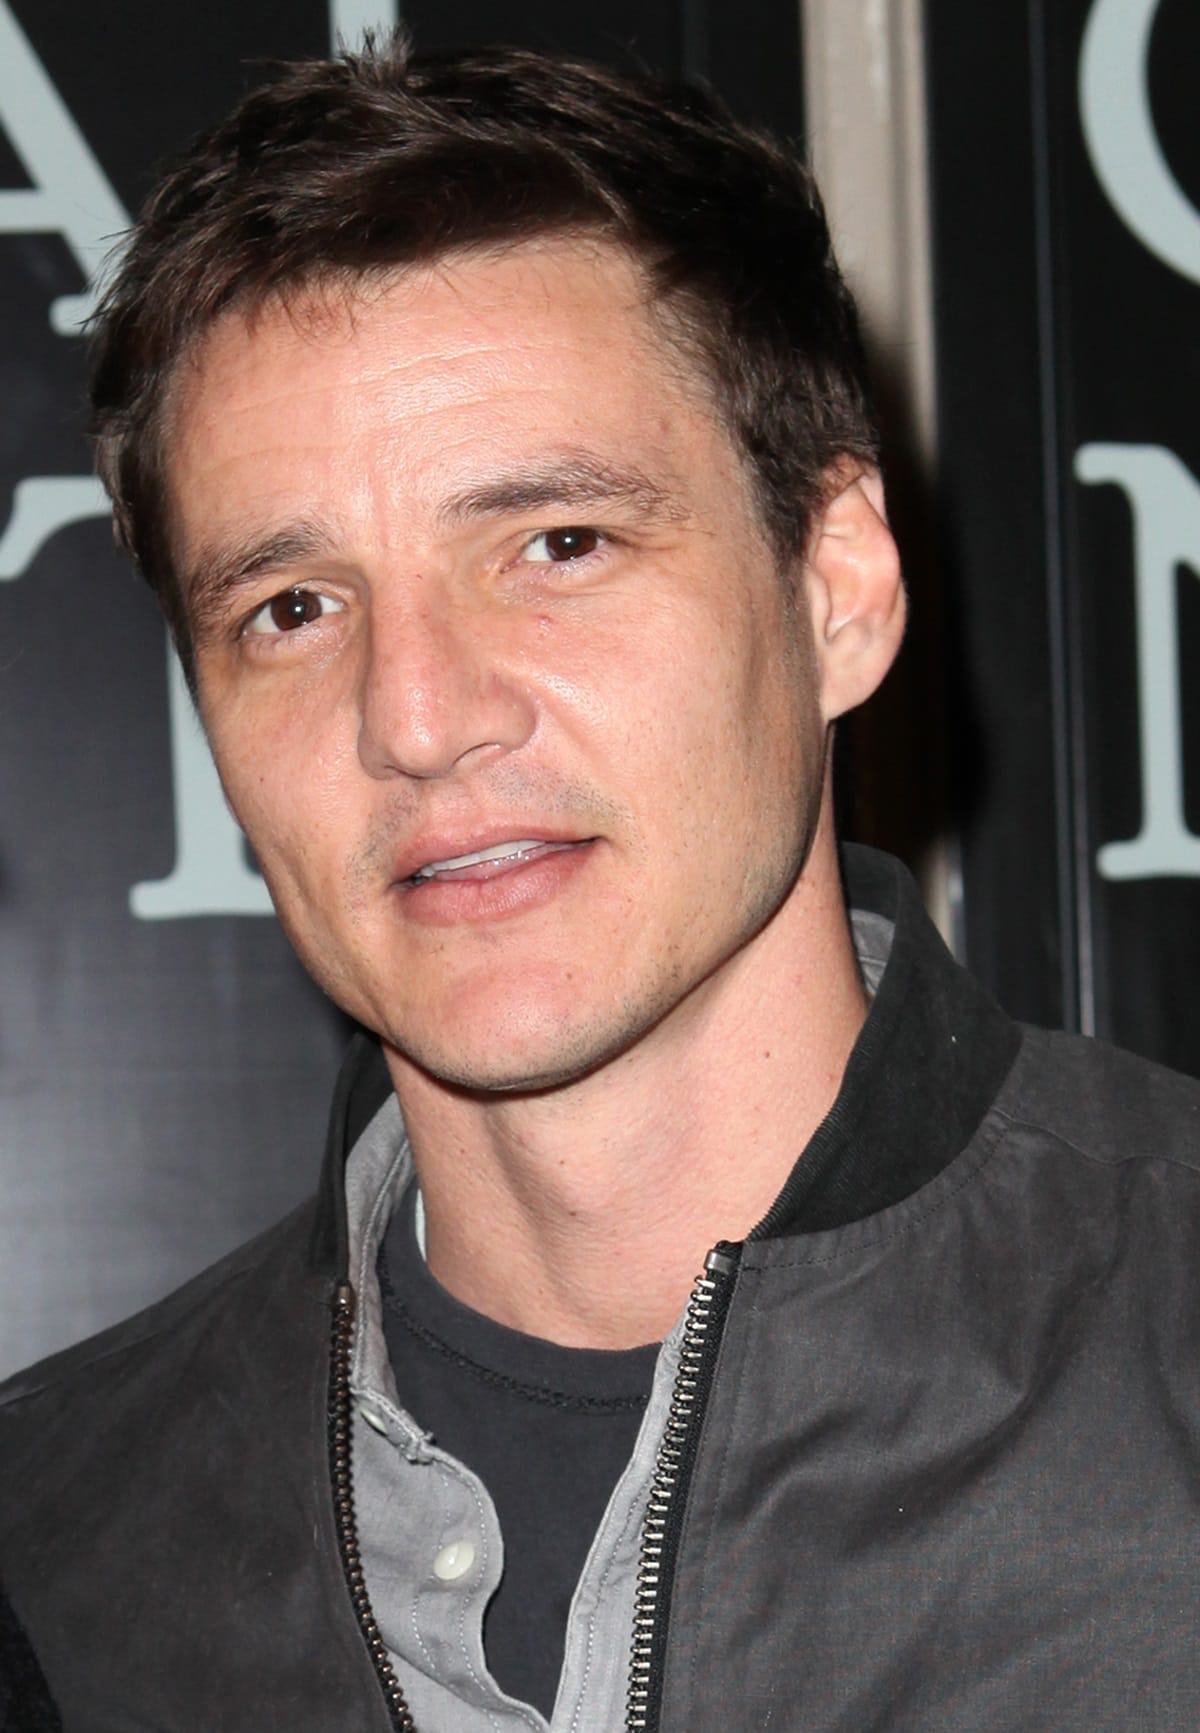 Pedro Pascal's parents, Verónica Pascal, a child psychologist, and José Balmaceda, a fertility doctor, were forced to flee Chile due to their involvement in the opposition movement against Augusto Pinochet's military dictatorship